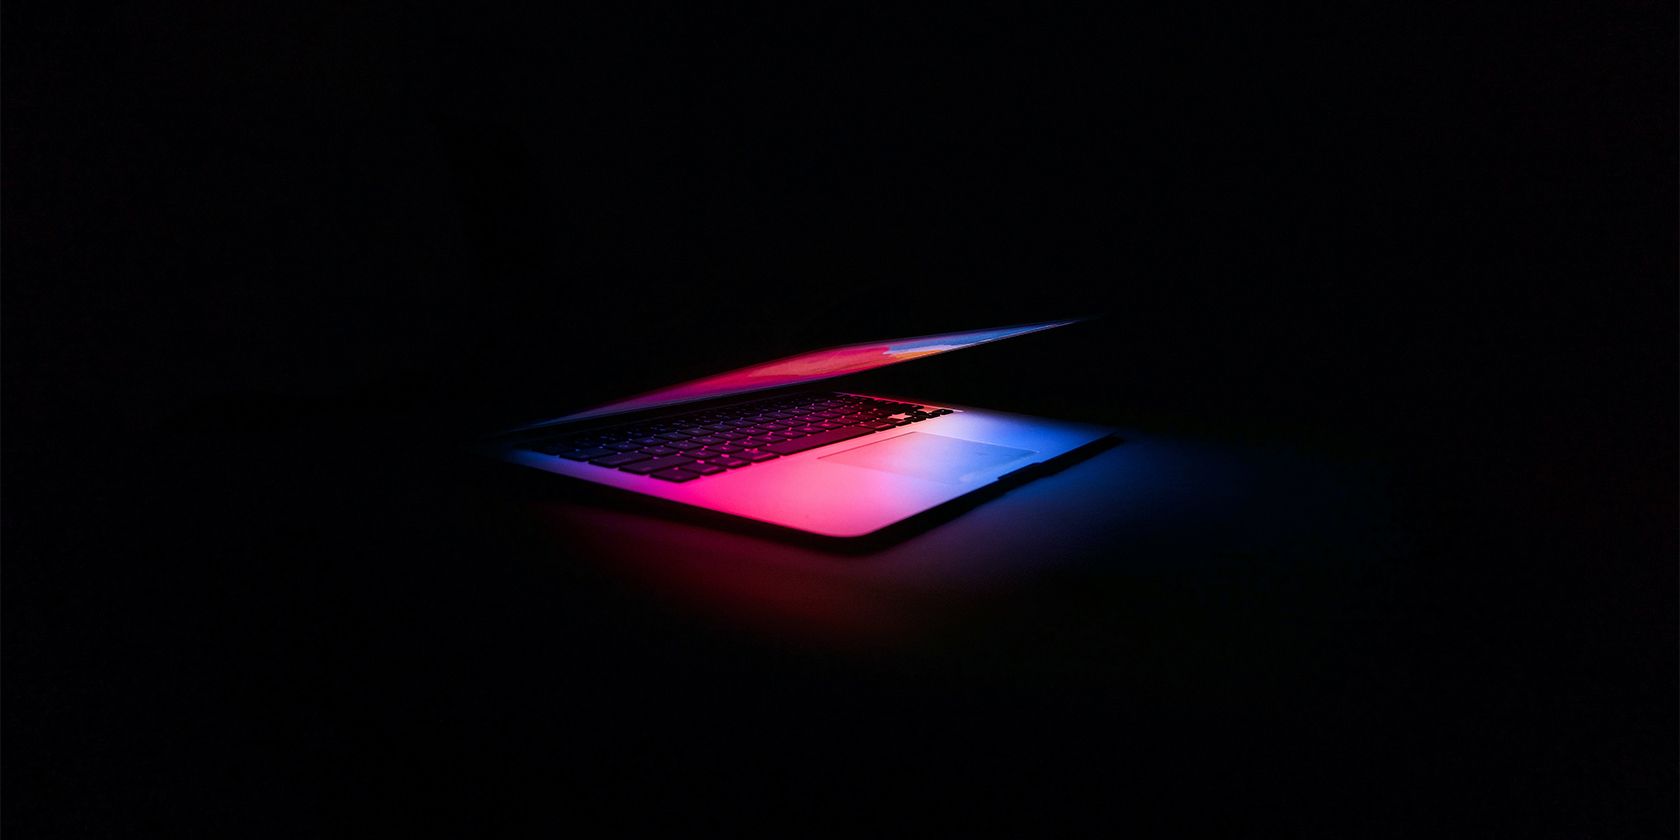 The Apple MacBook Placed on a Dark Surface